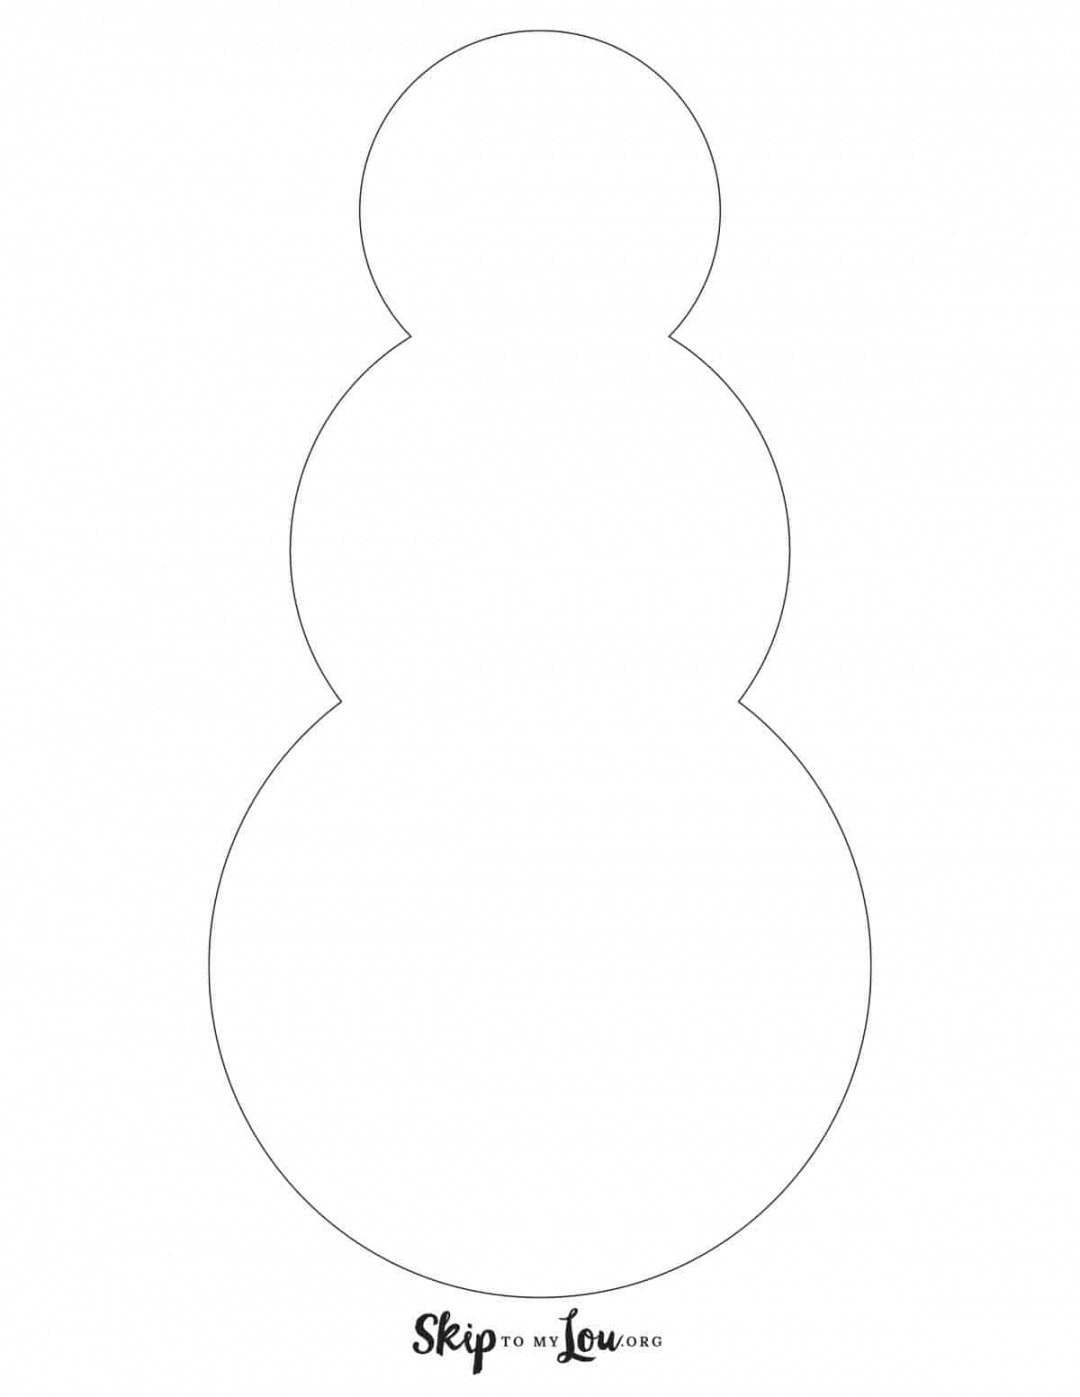 Free Printable Snowman Templates for Crafts  Skip To My Lou - FREE Printables - Snowman Template Printable Free